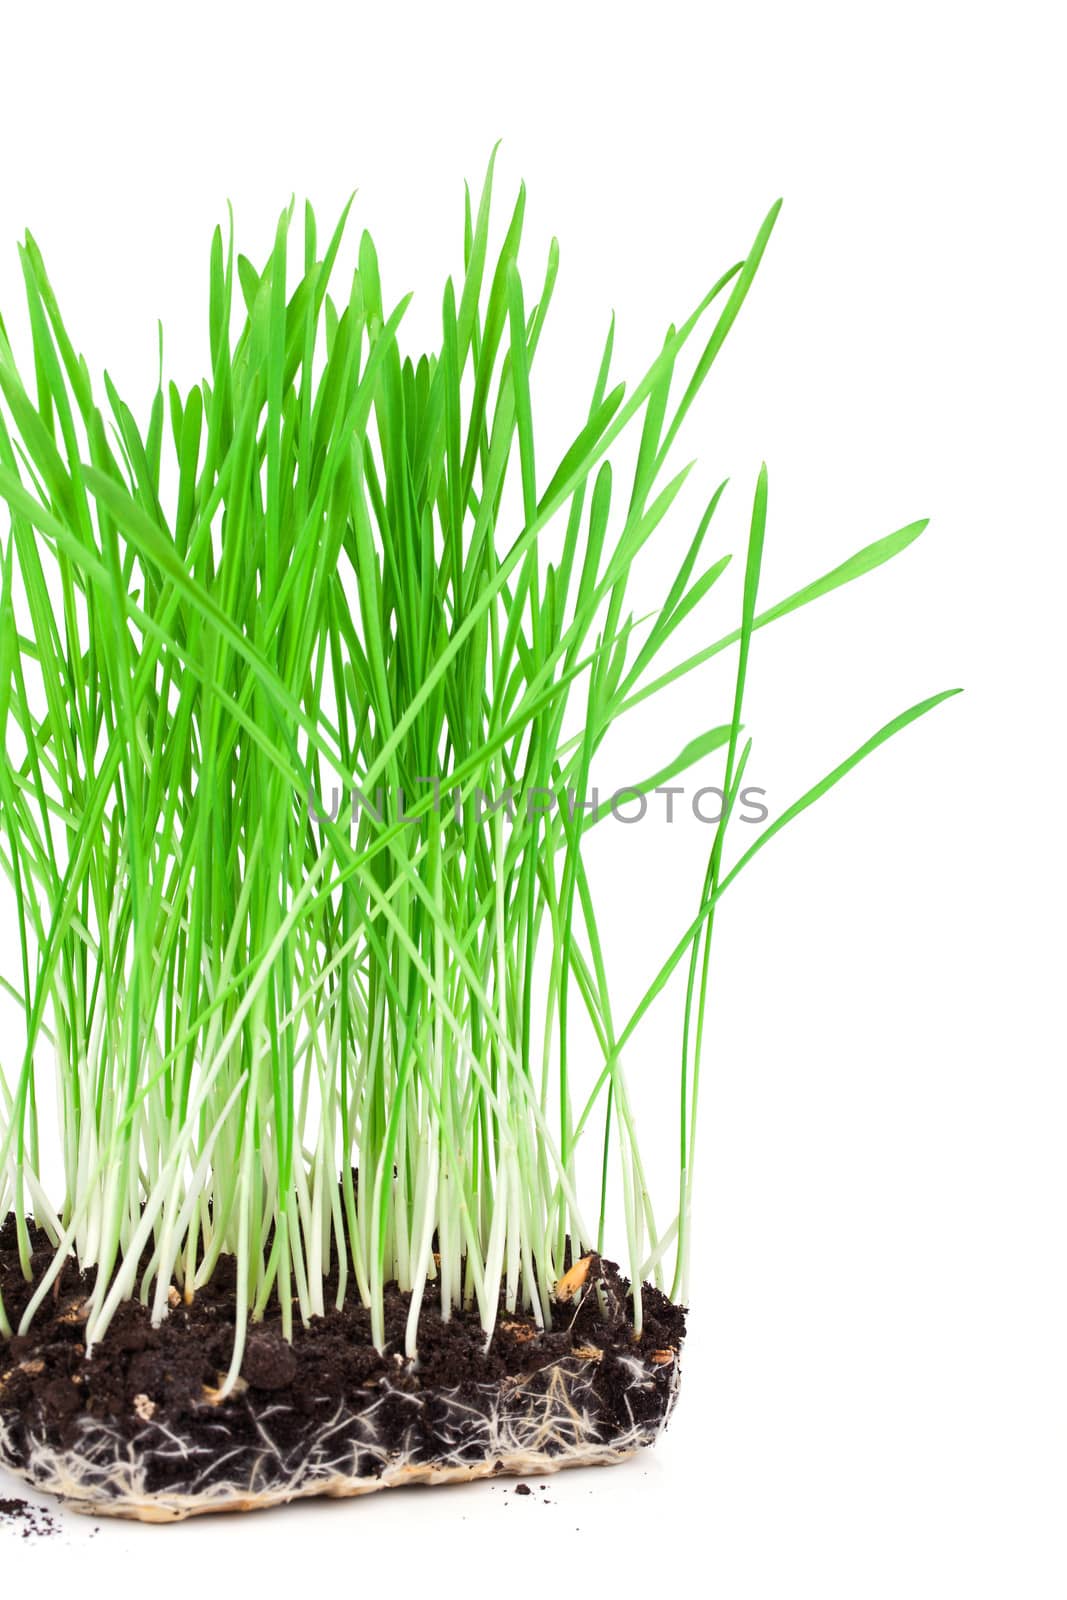 Green grass showing roots, on a white background. by motorolka